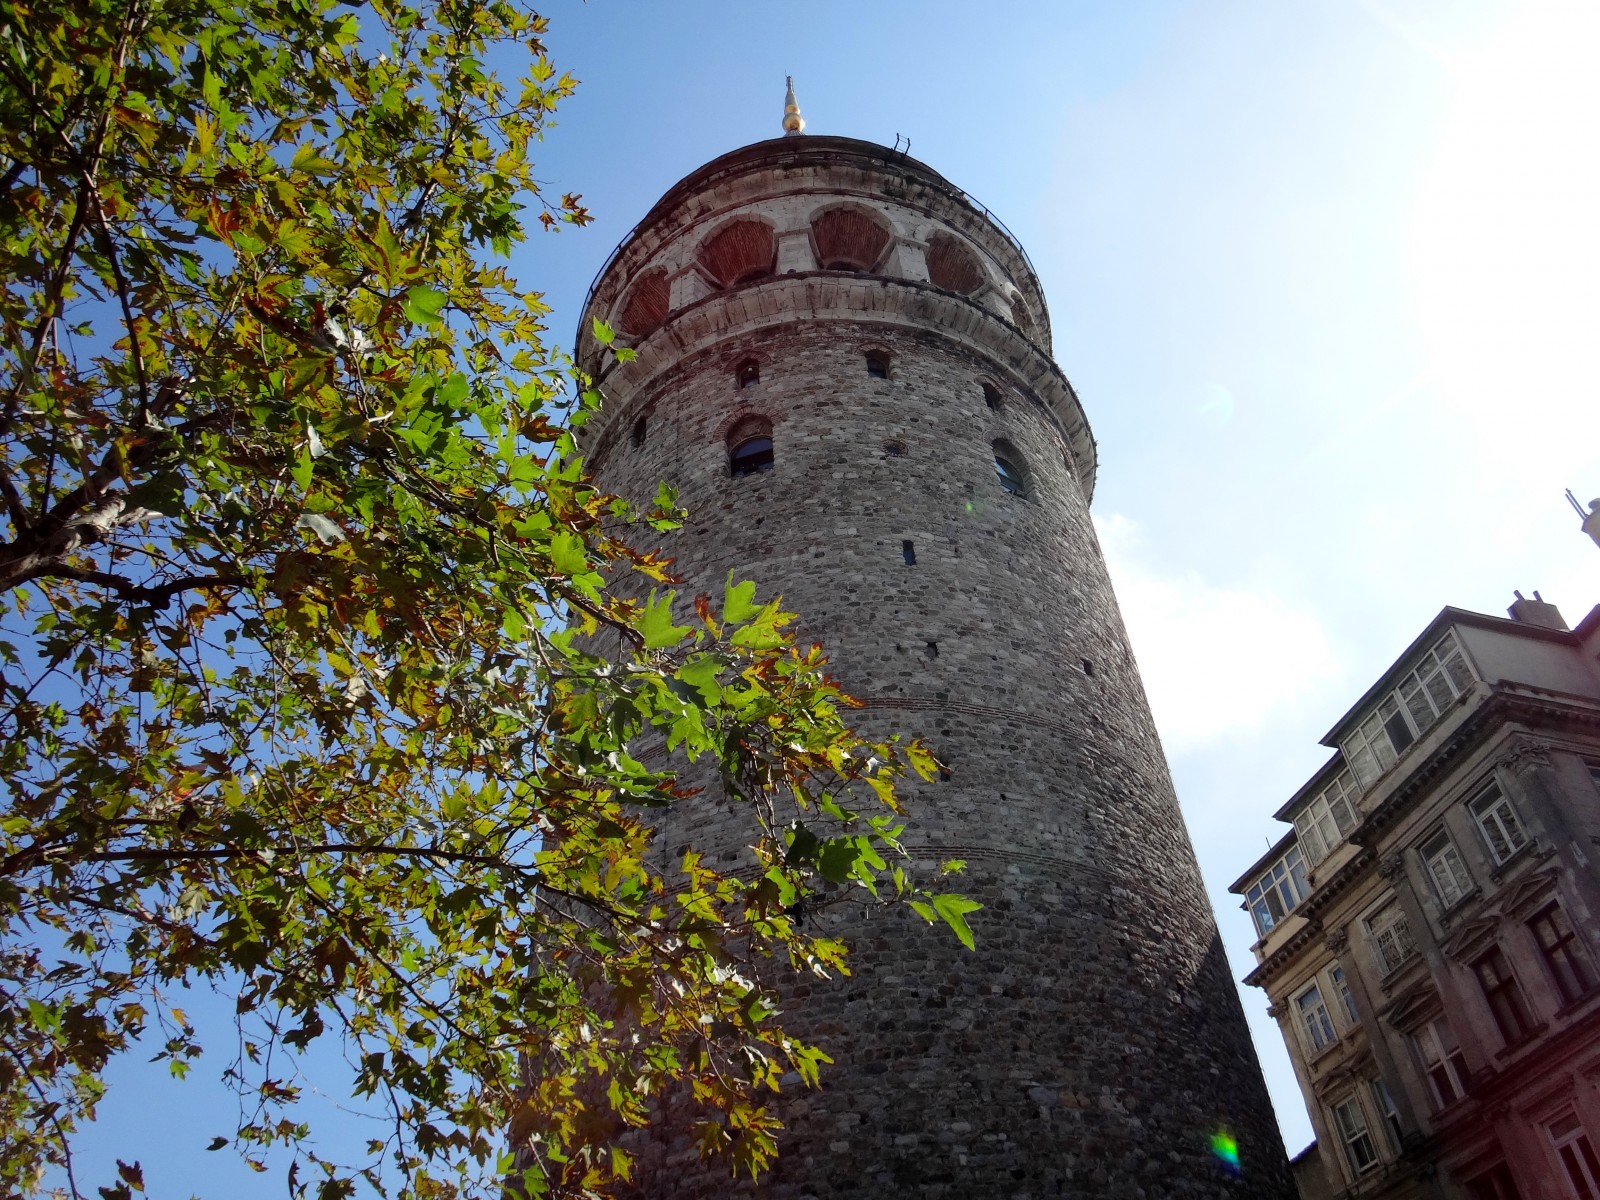 Galata Tower - Istanbul Turkey, Oldest lighthouse in the world